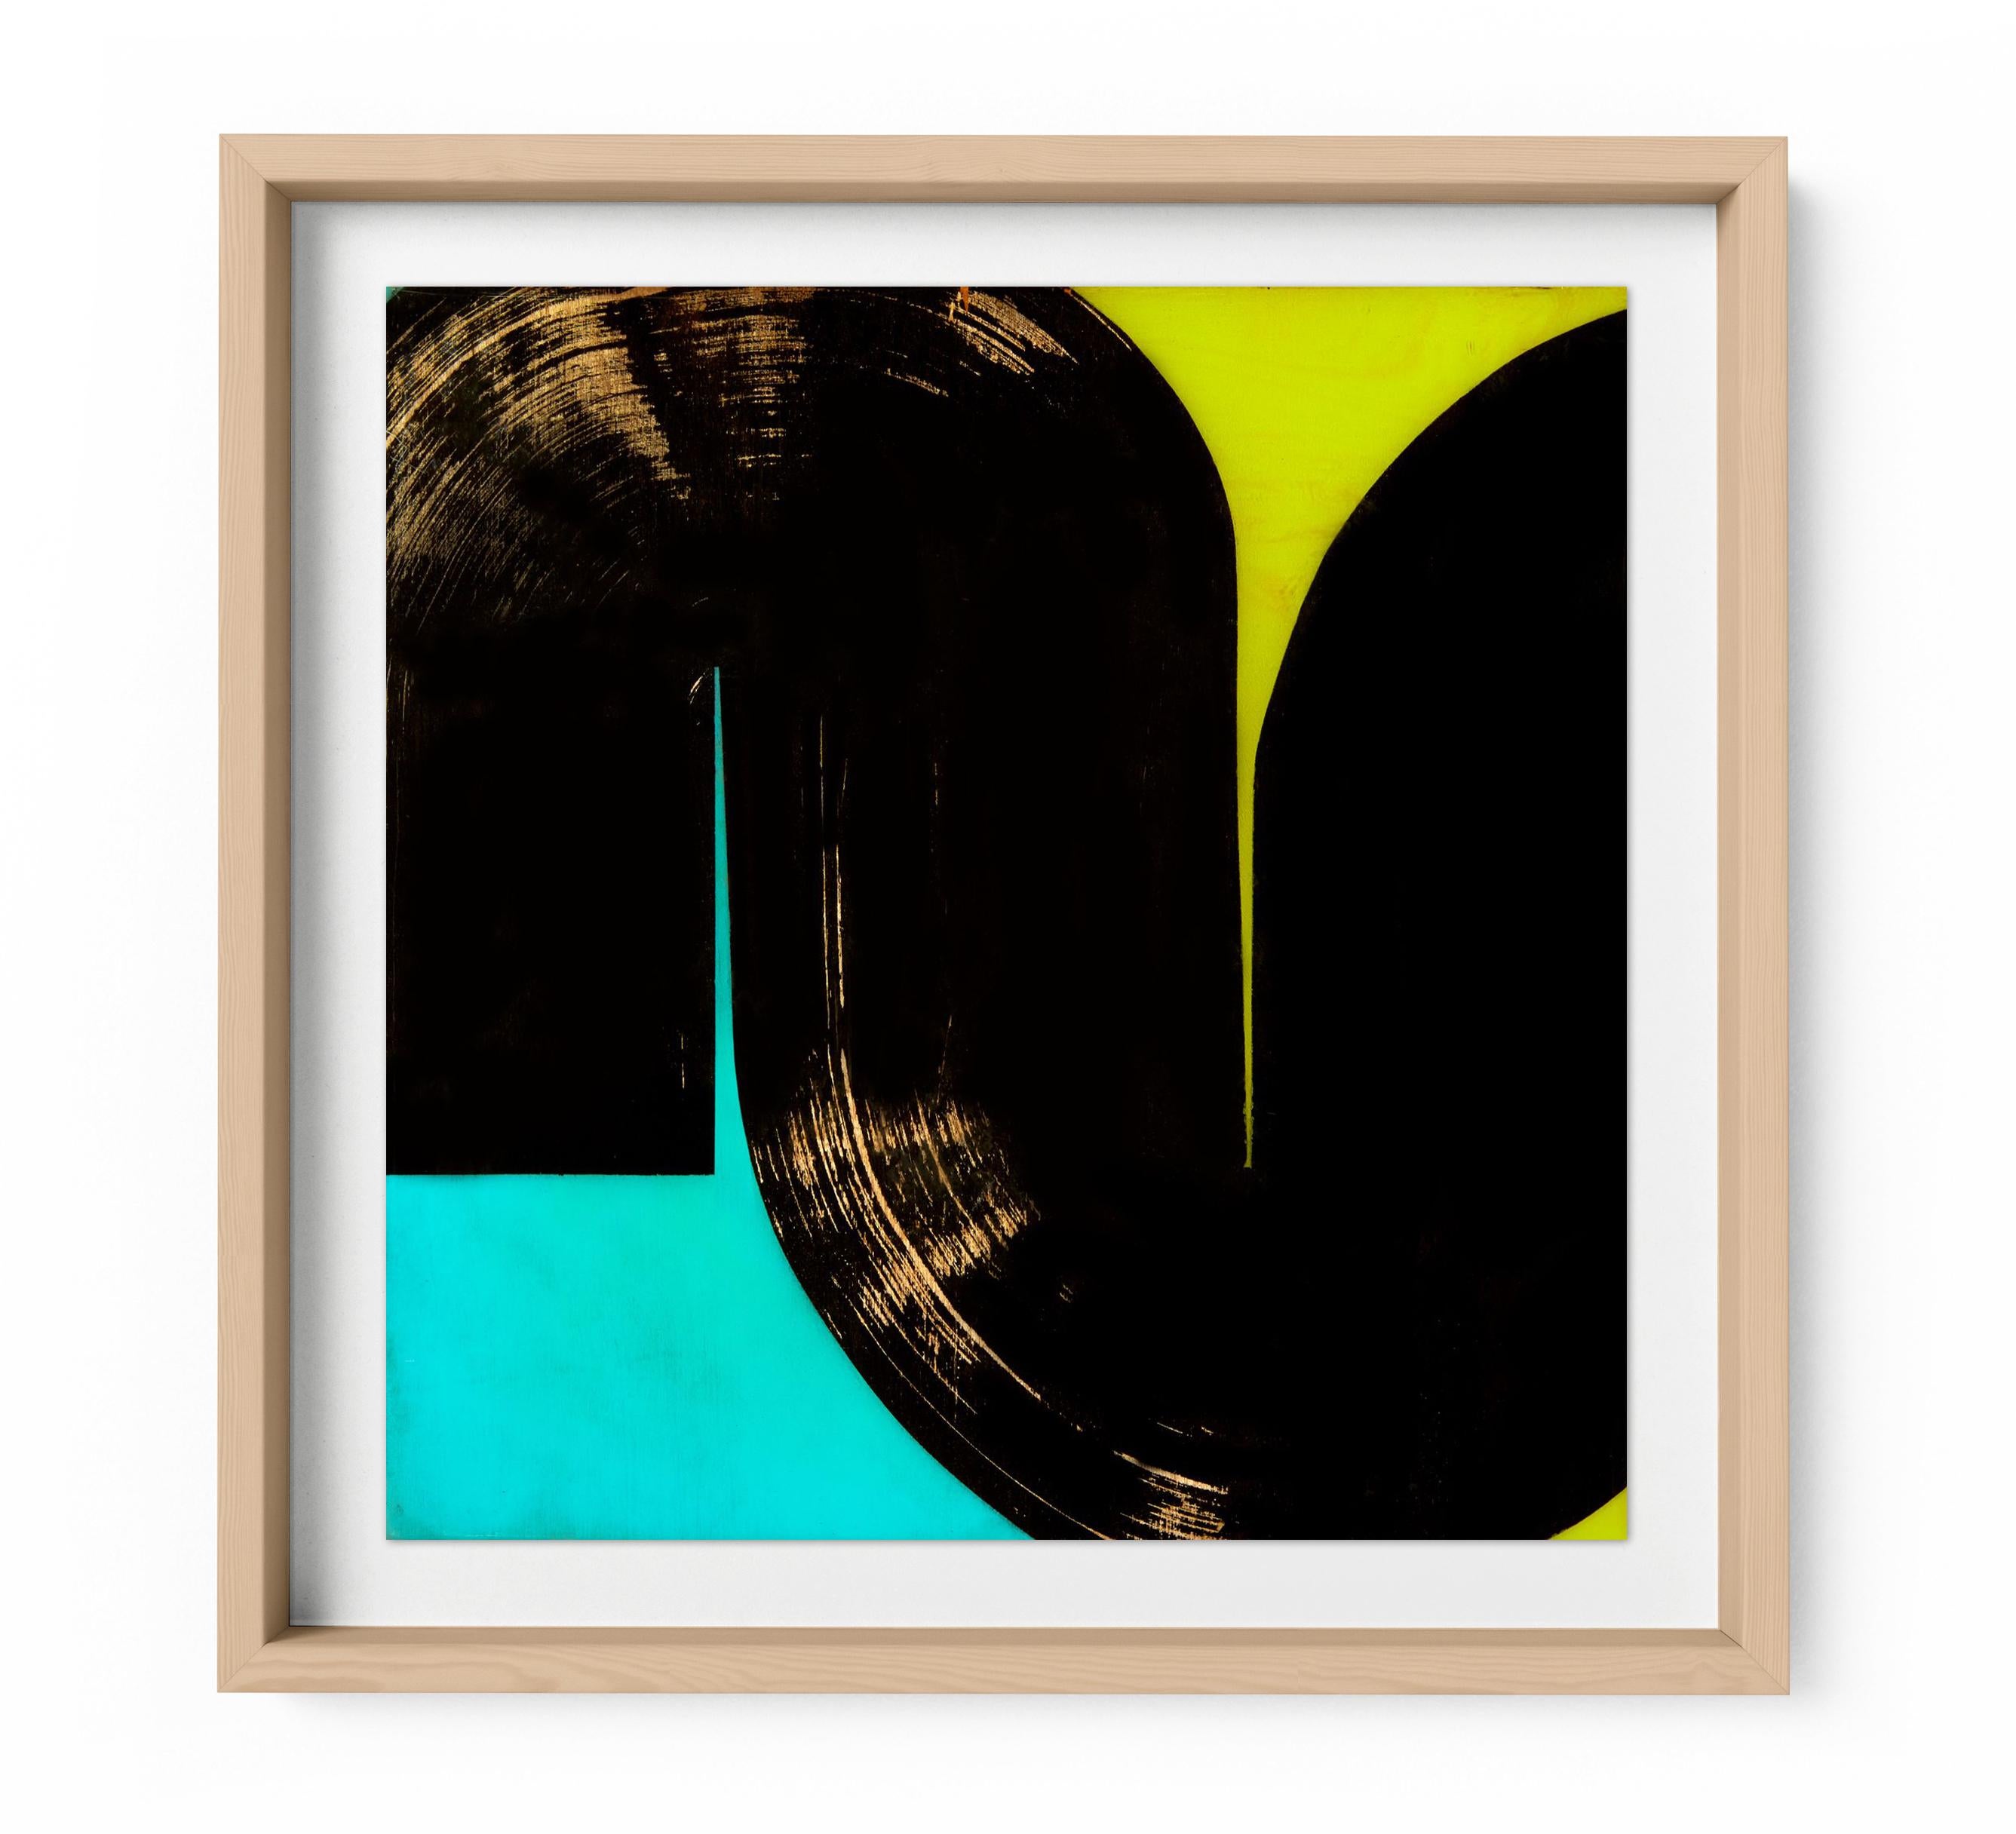 U-turn - Framed Limited Edition Print - Contemporary - Modern Abstract - Black Abstract Print by Karlos Marquez